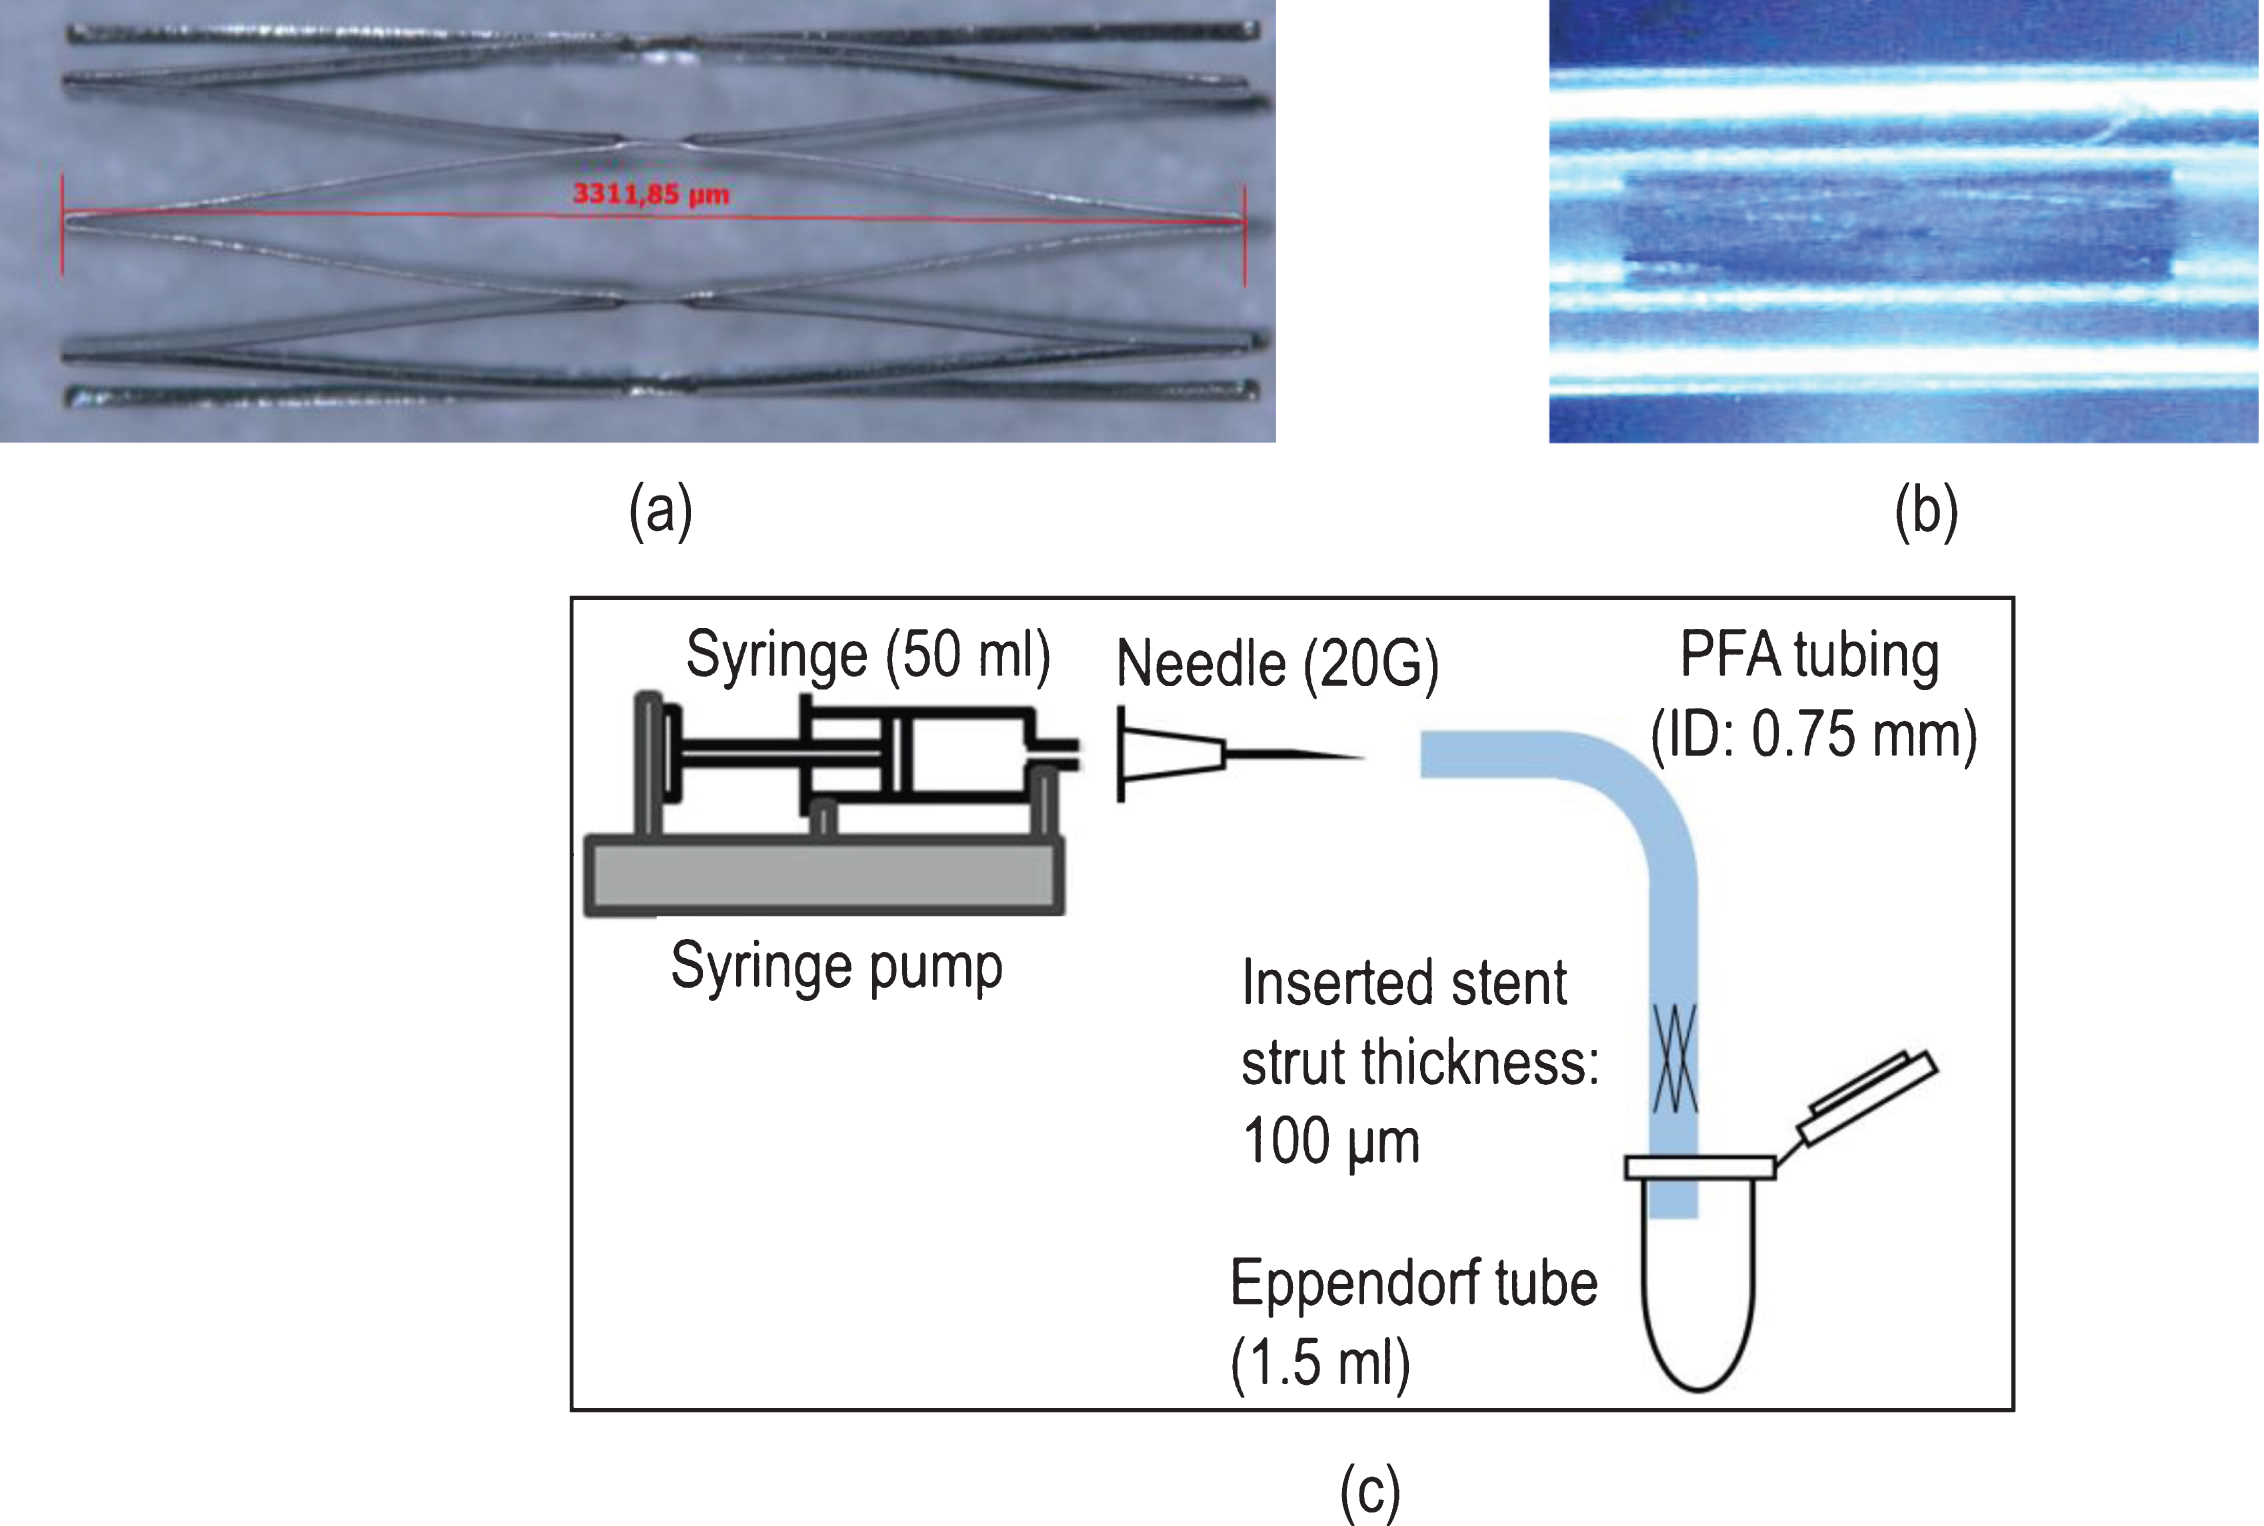 (a) The nitinol stent used in the study, (b) the inserted stent in the PFA tubing, and (c) a diagrammatic representation of the flow configuration (not drawn to scale).